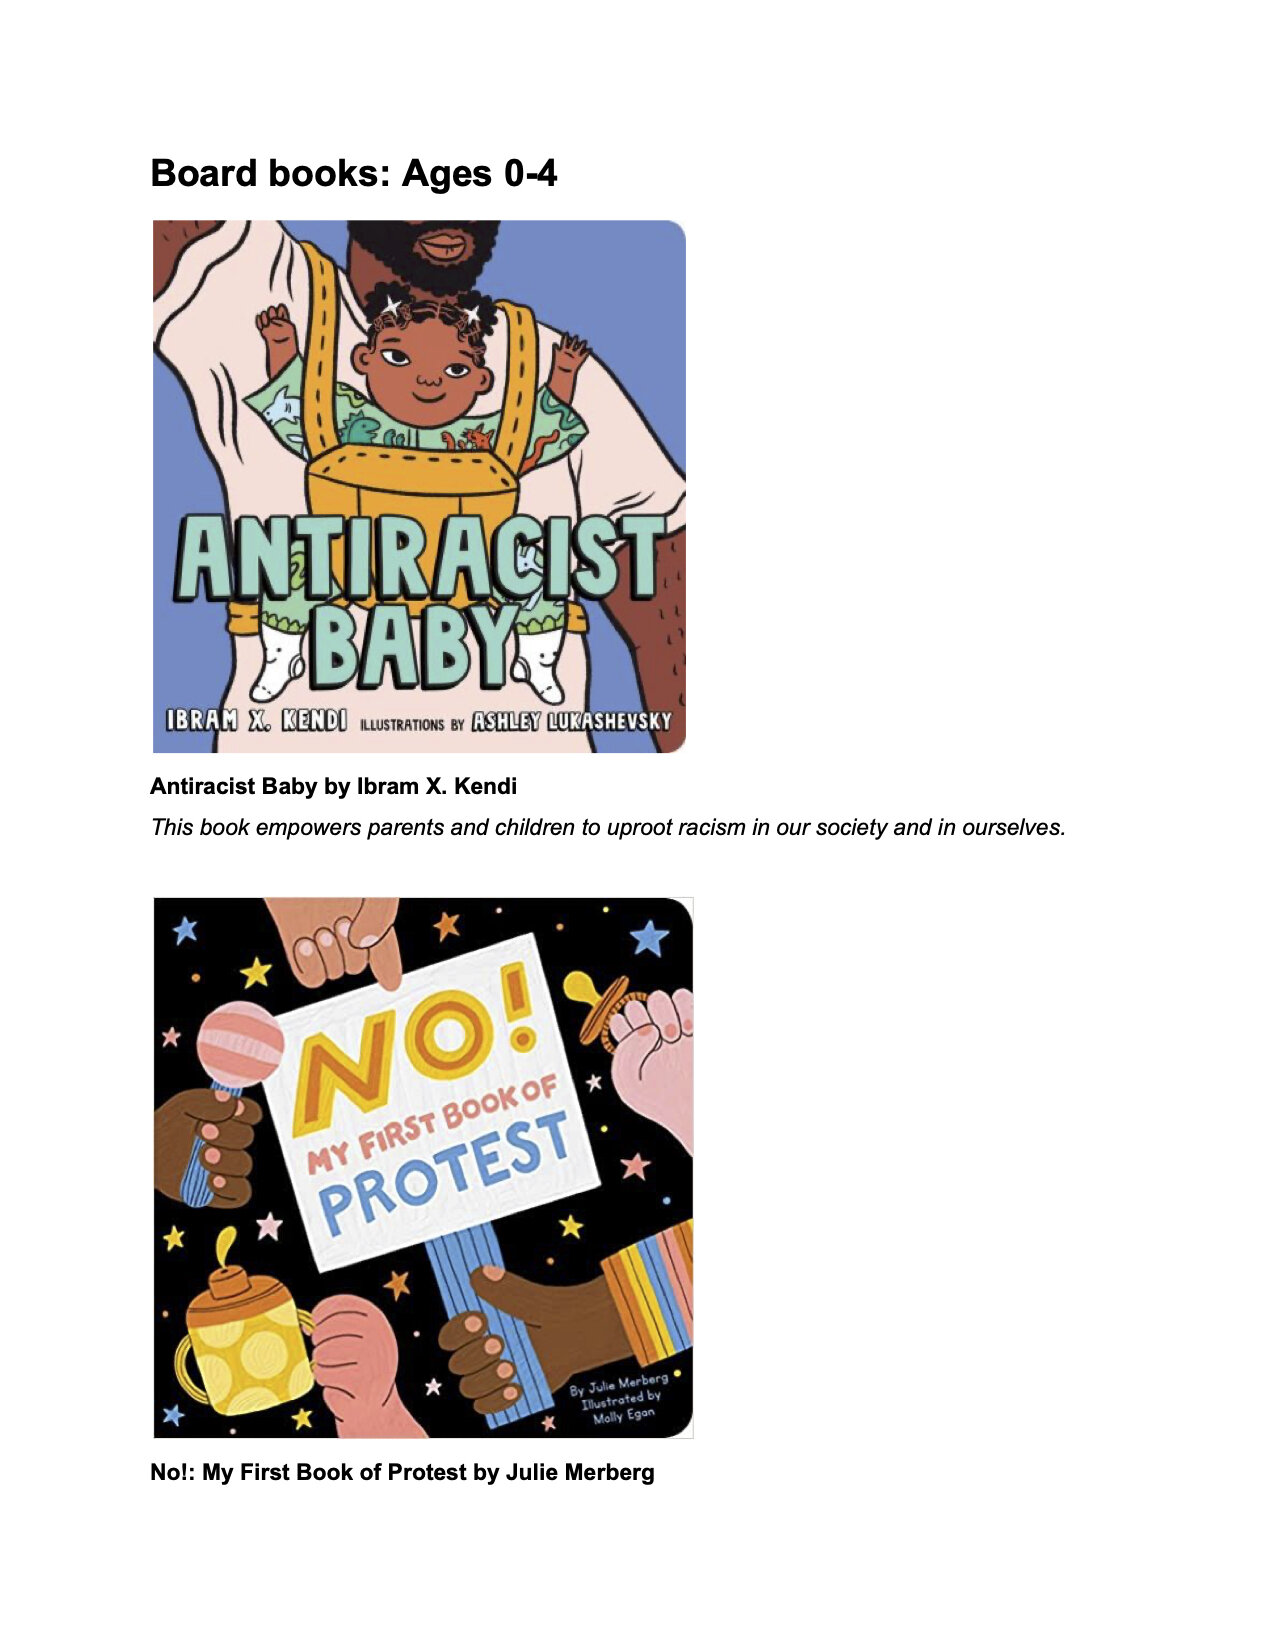 1-Childrens books about anti-racism and activism (1).jpg